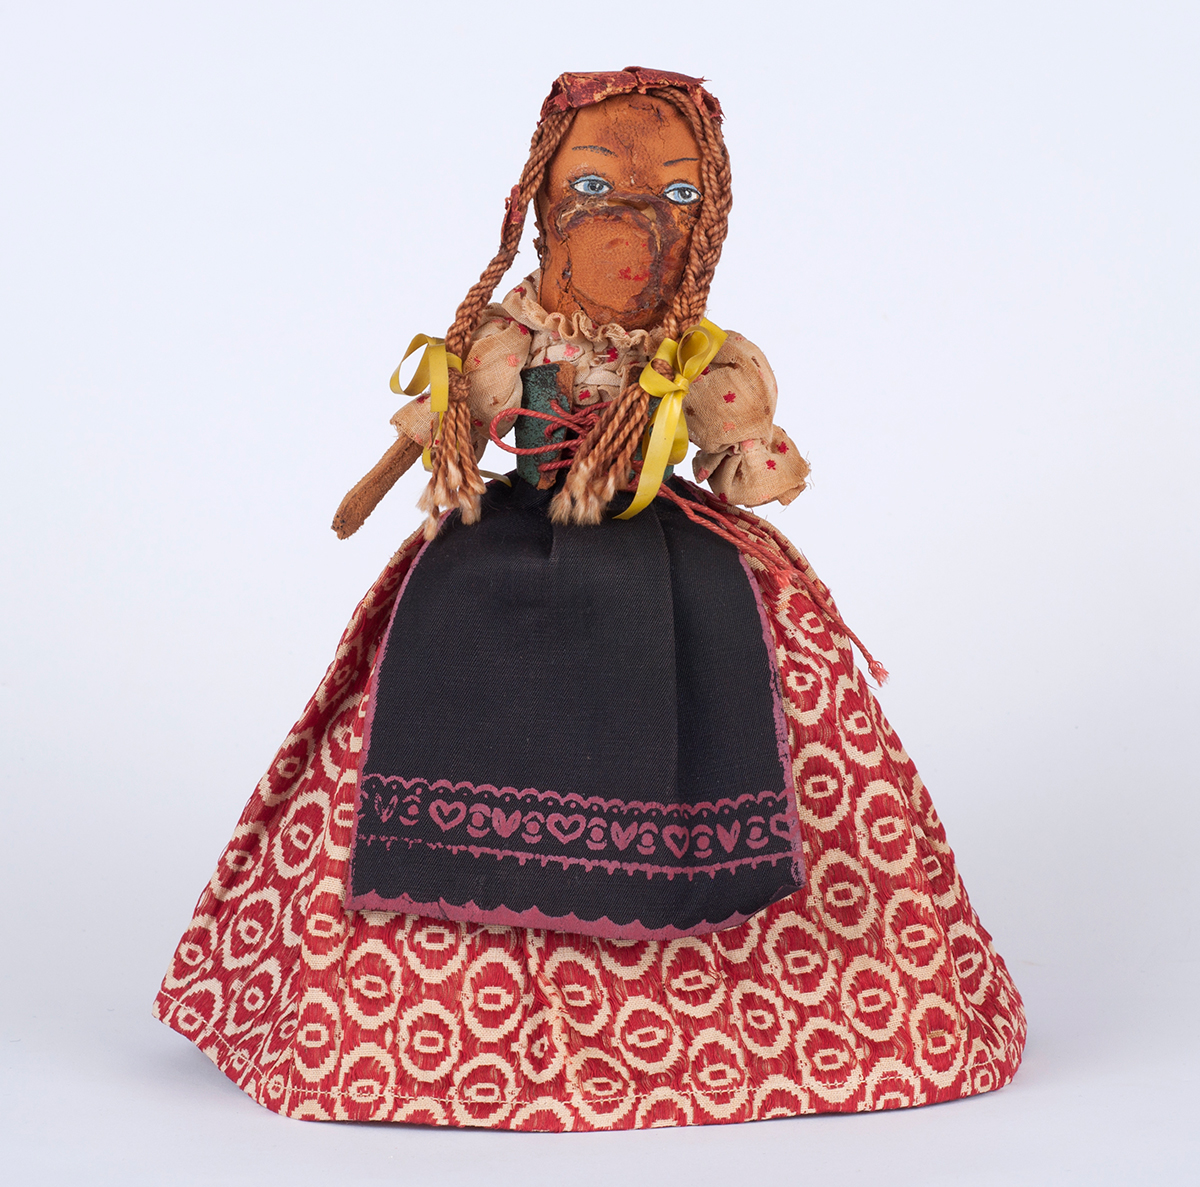 A doll made by Pauline Hirsch Klauber in the Theresienstadt ghetto